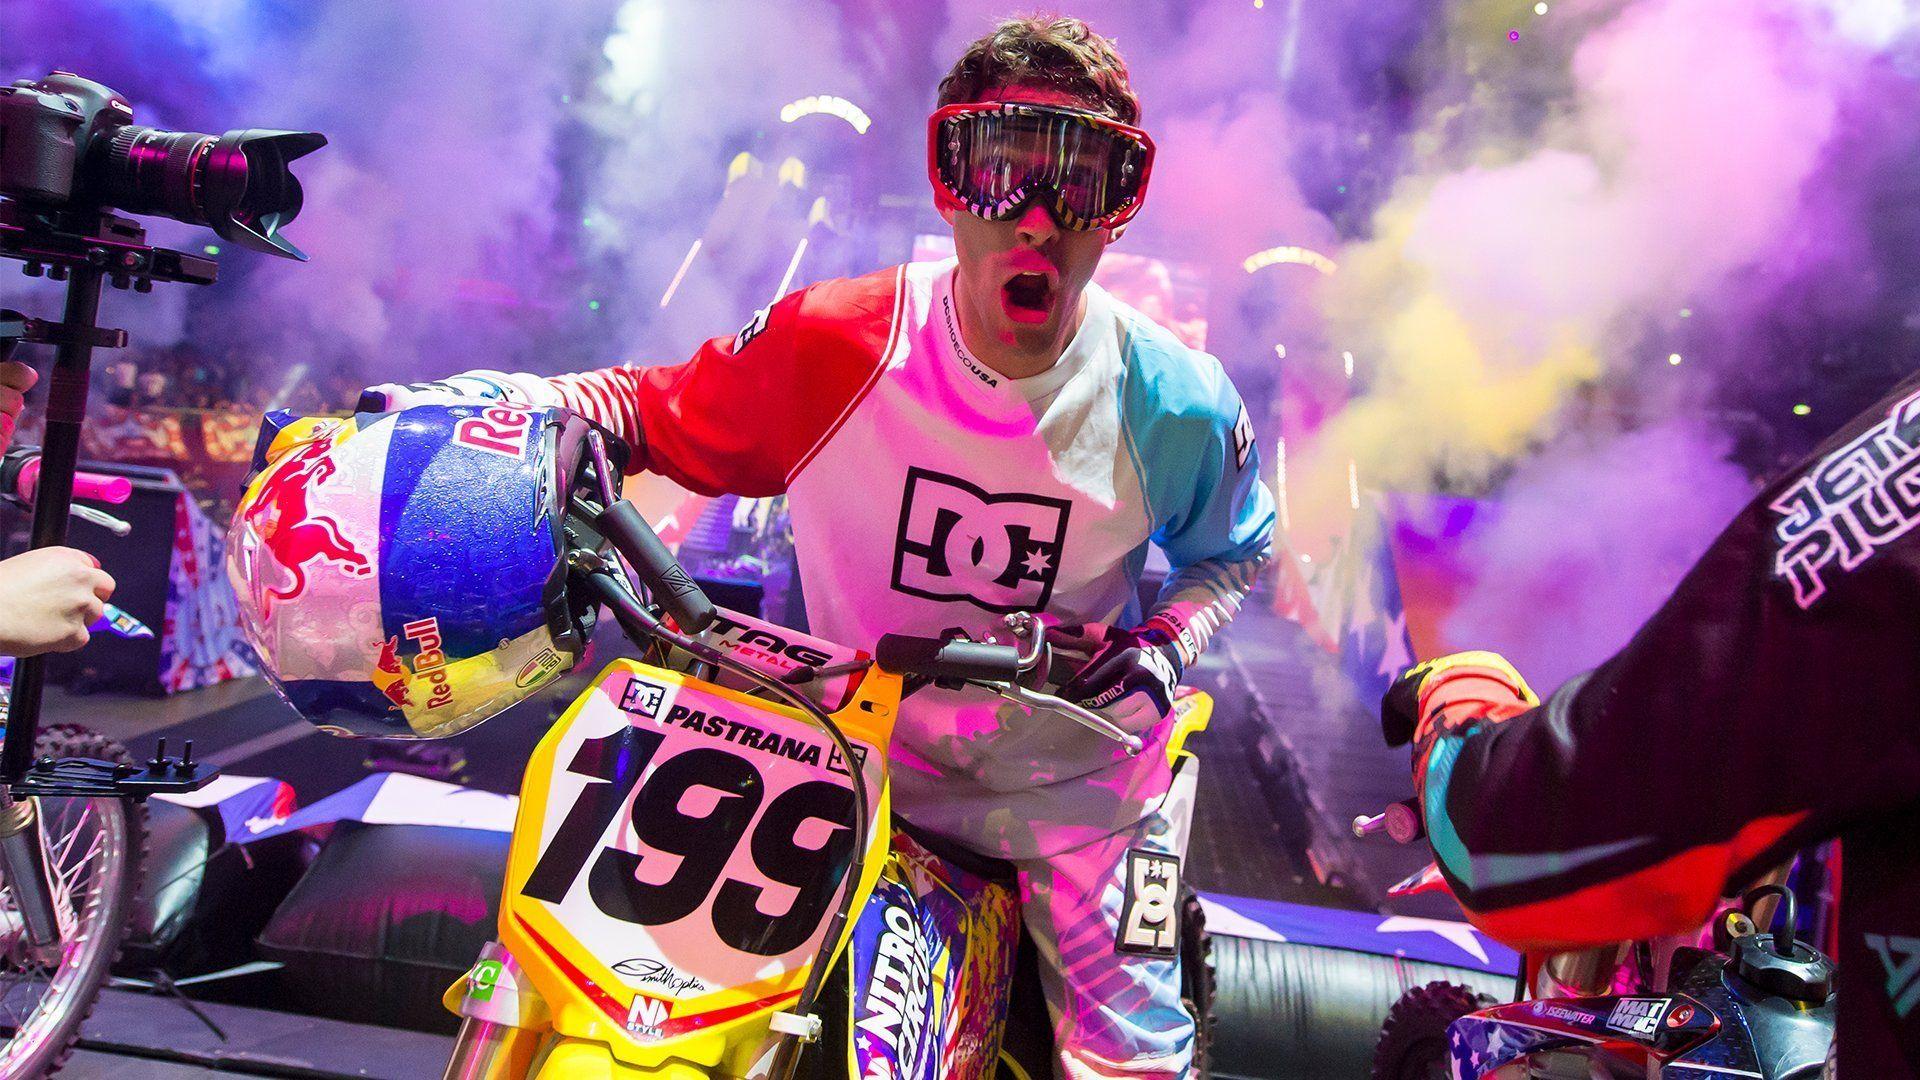 Travis Pastrana Life of the Party Mobile Wallpaper